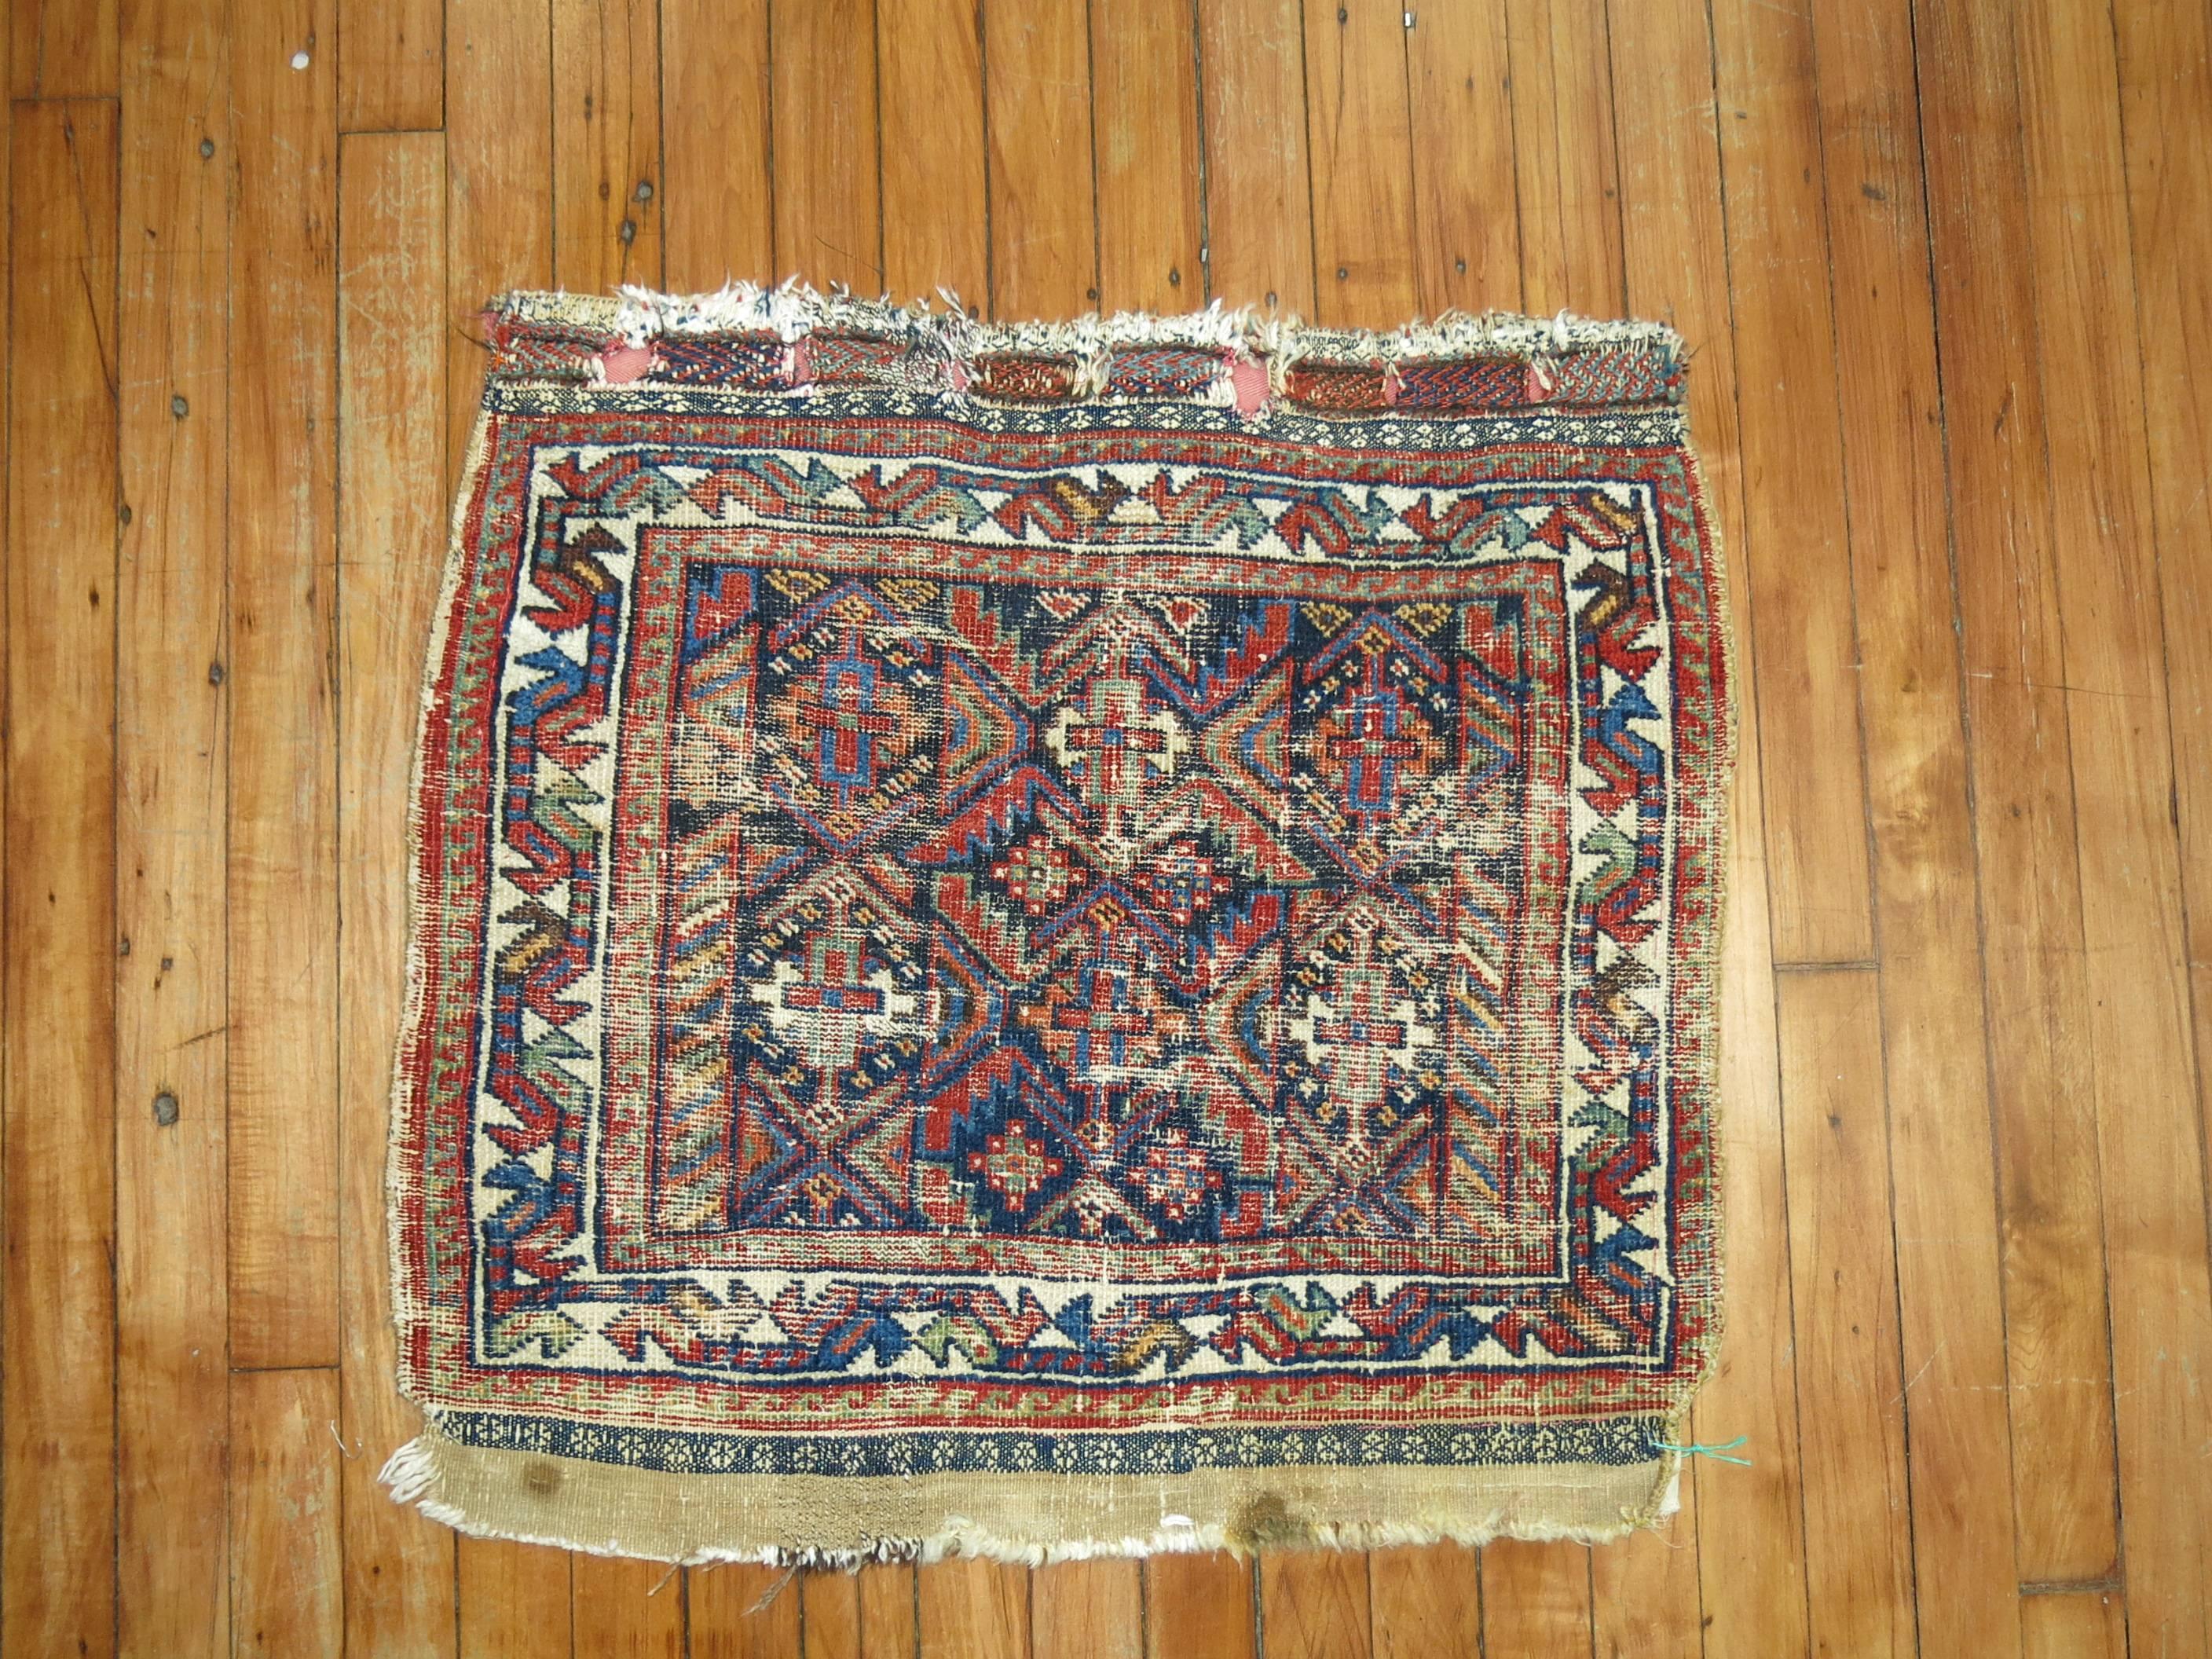 Early 20th century Persian Afshar rug.

Measures: 25